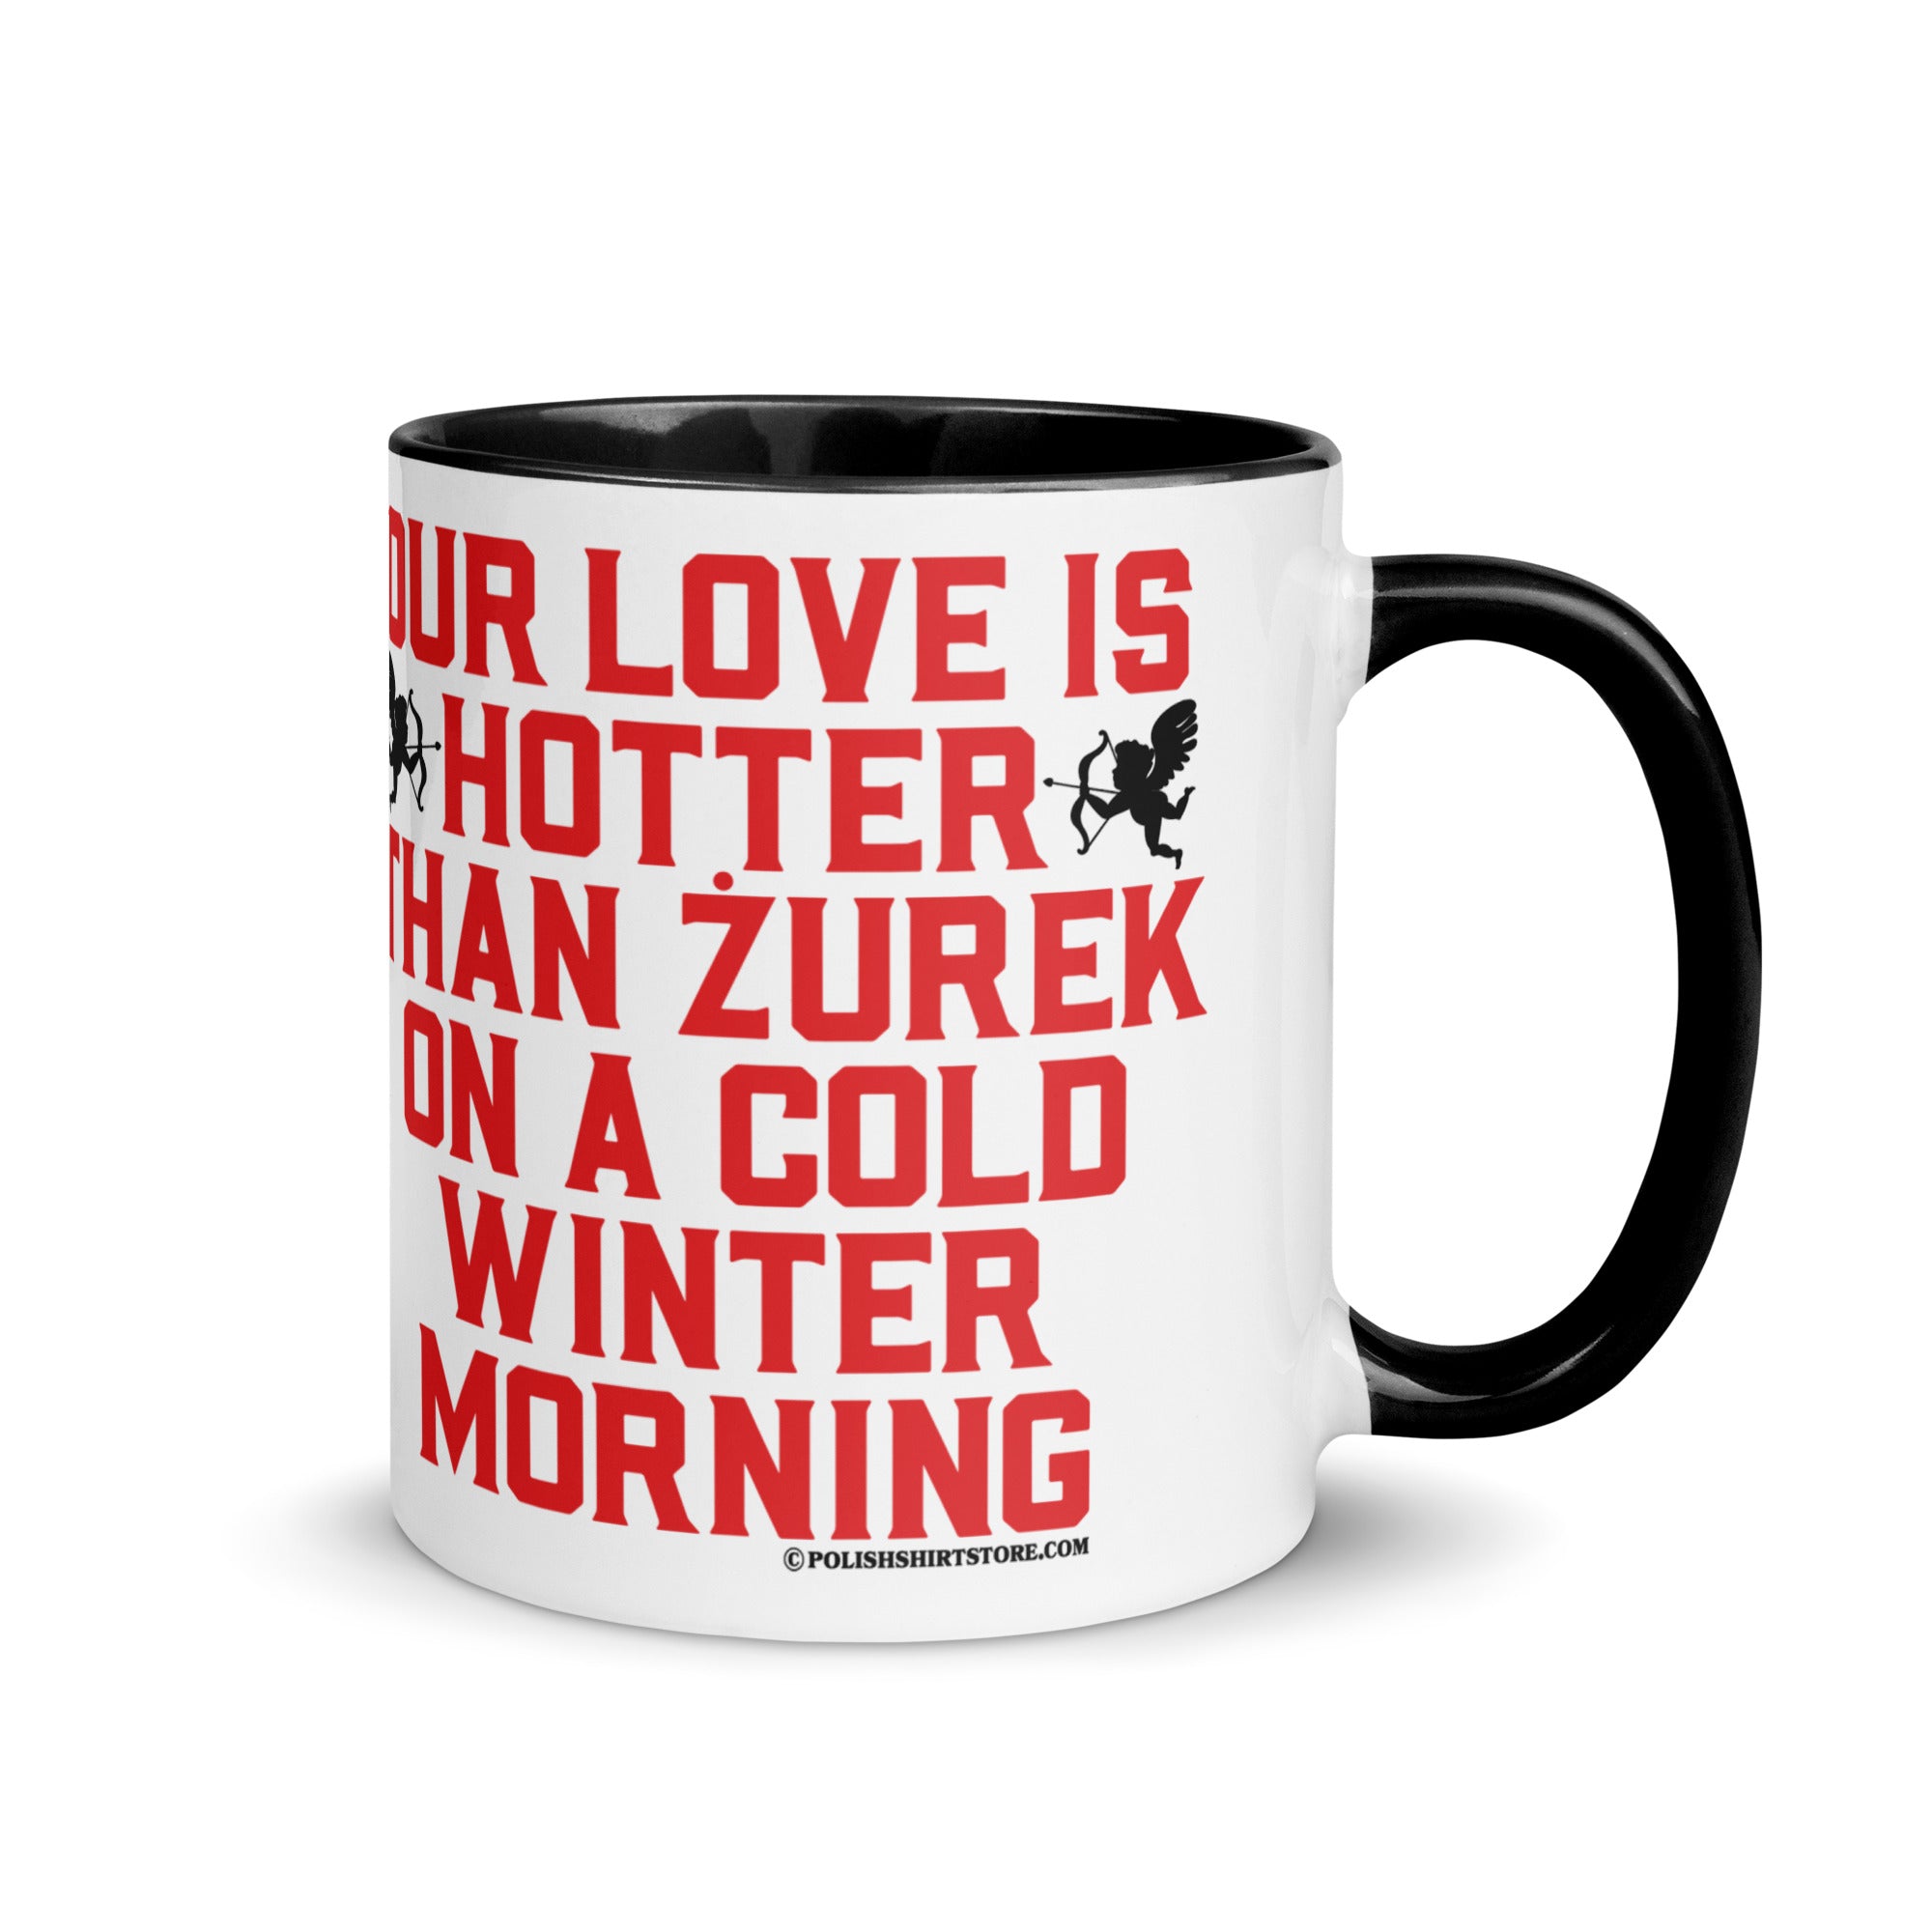 Our Love Is Hotter Than Zurek On A Cold Winter Morning Coffee Mug with Color Inside  Polish Shirt Store Black 11 oz 